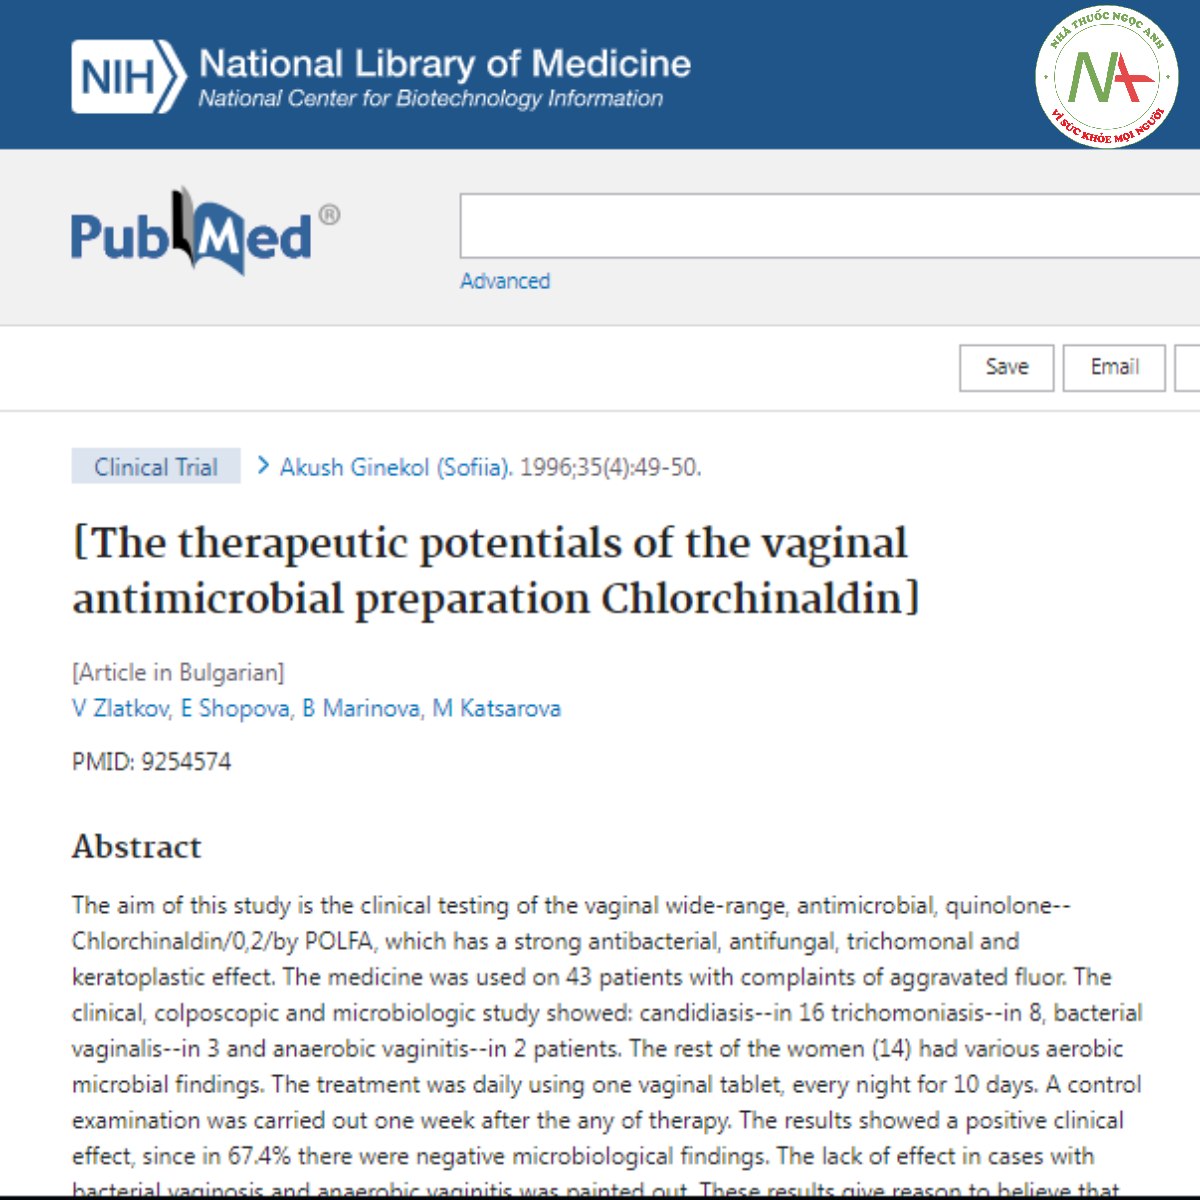 The therapeutic potentials of the vaginal antimicrobial preparation Chlorchinaldin